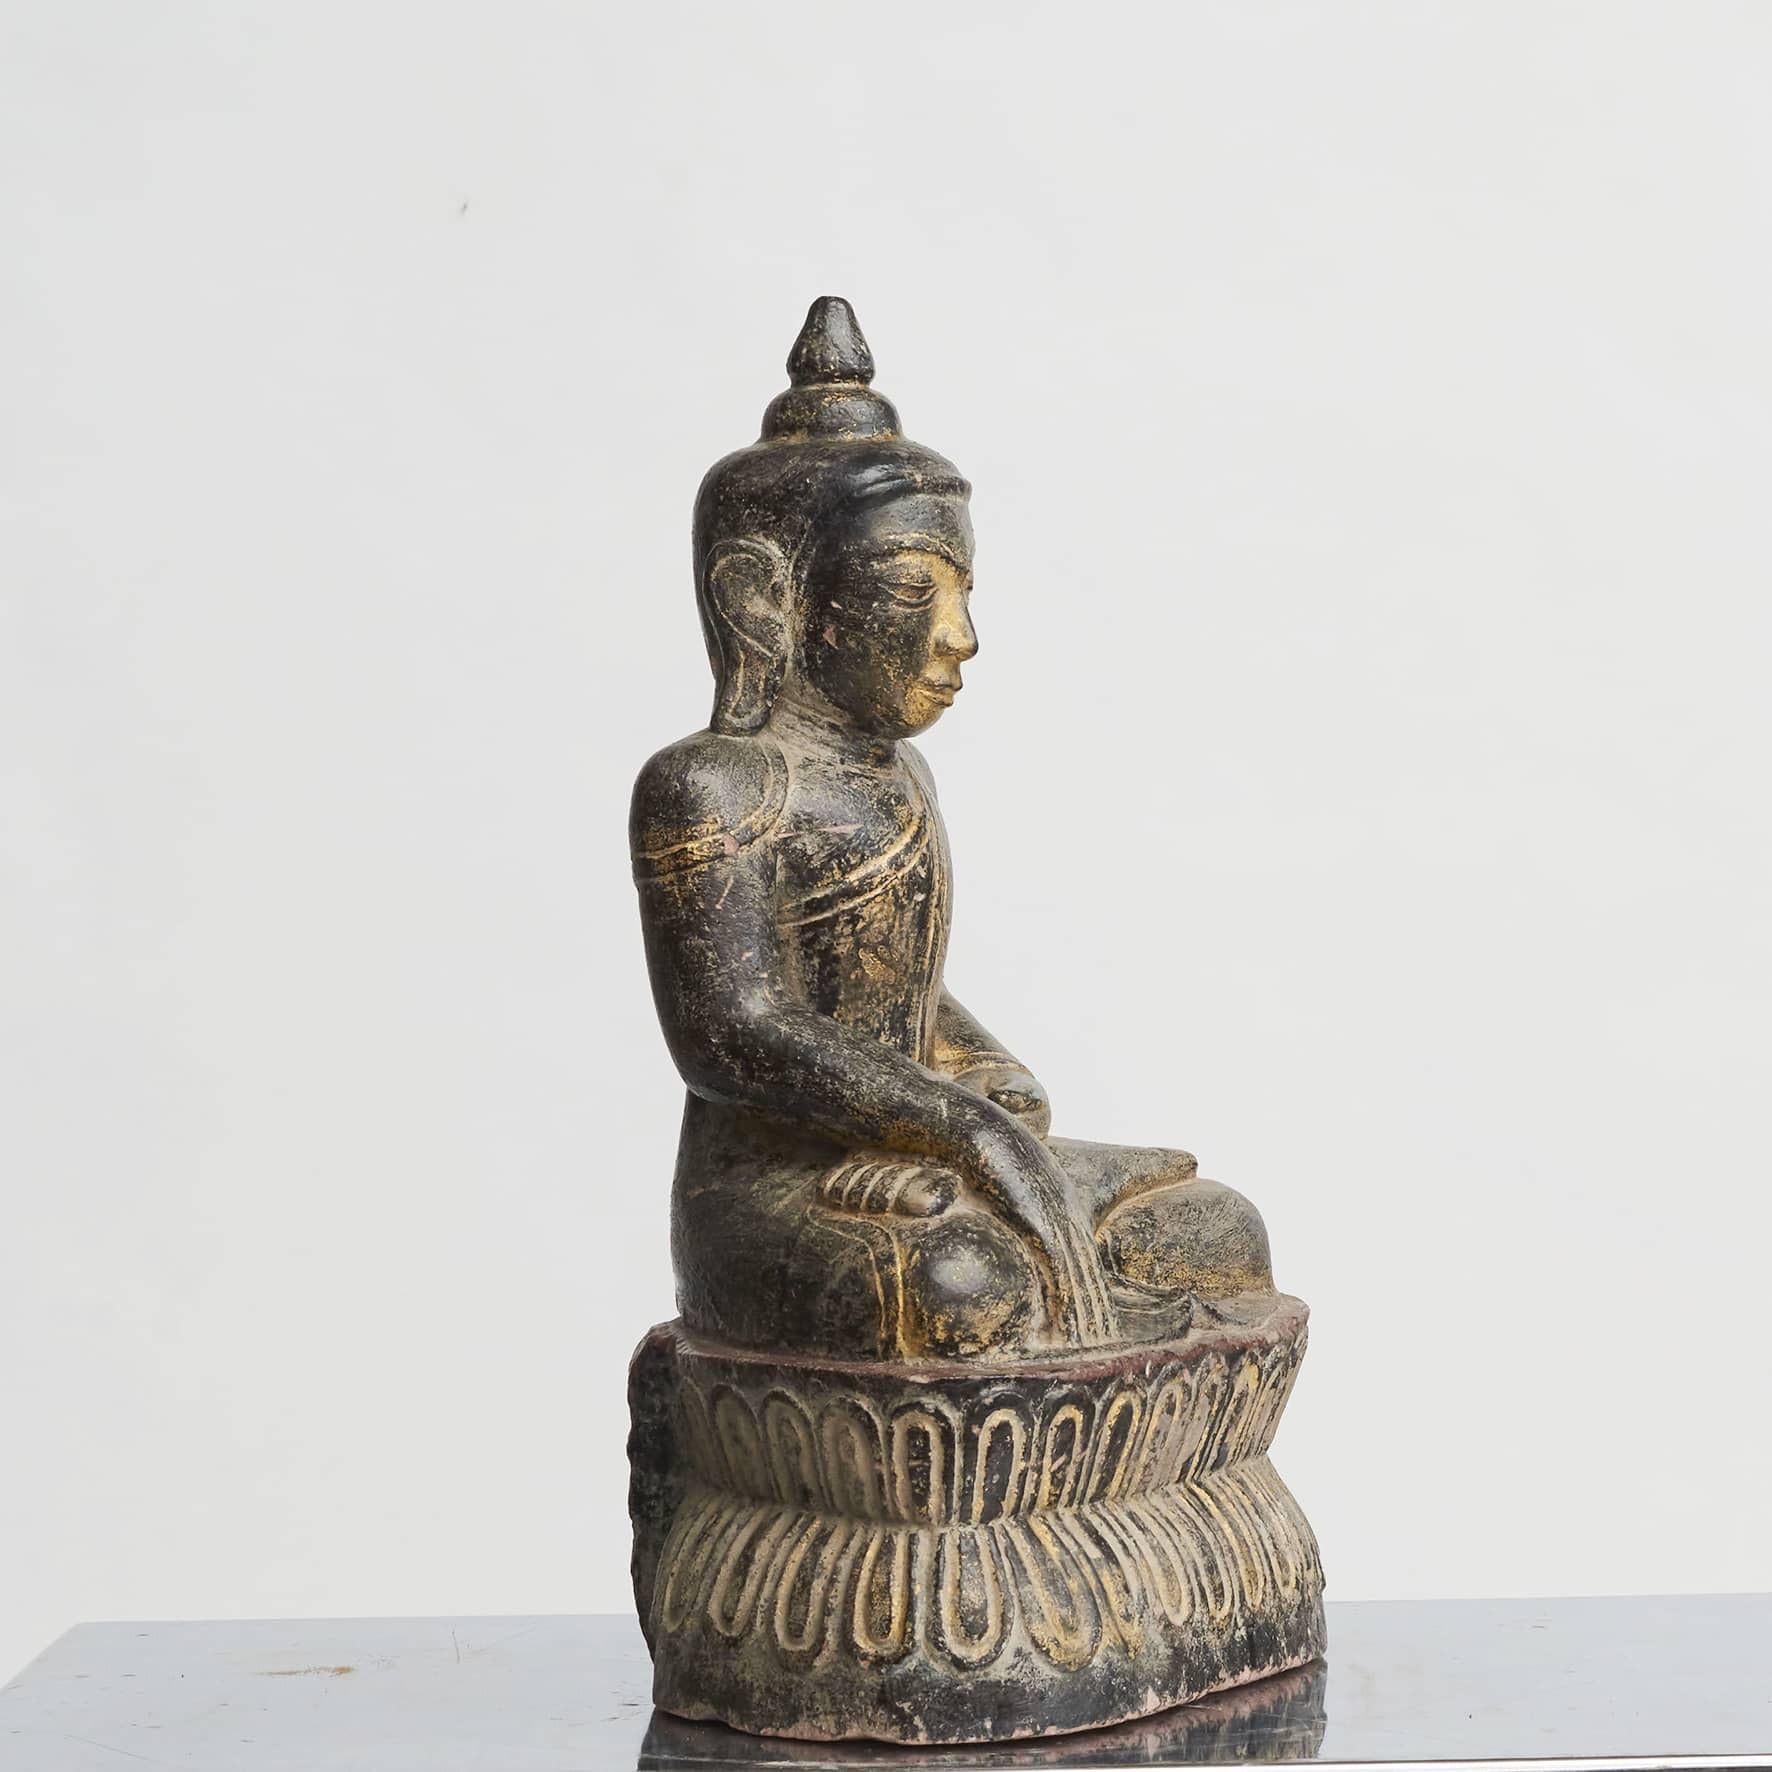 A mid 18th century Burmese stone Buddha seated in Bhumisparsha mudra position* (“calling the earth to witness”).
Black-red lacquer with remnants of gilding.
Many fine details.
A very fine piece in good condition.

*A mudra in Buddha statues is